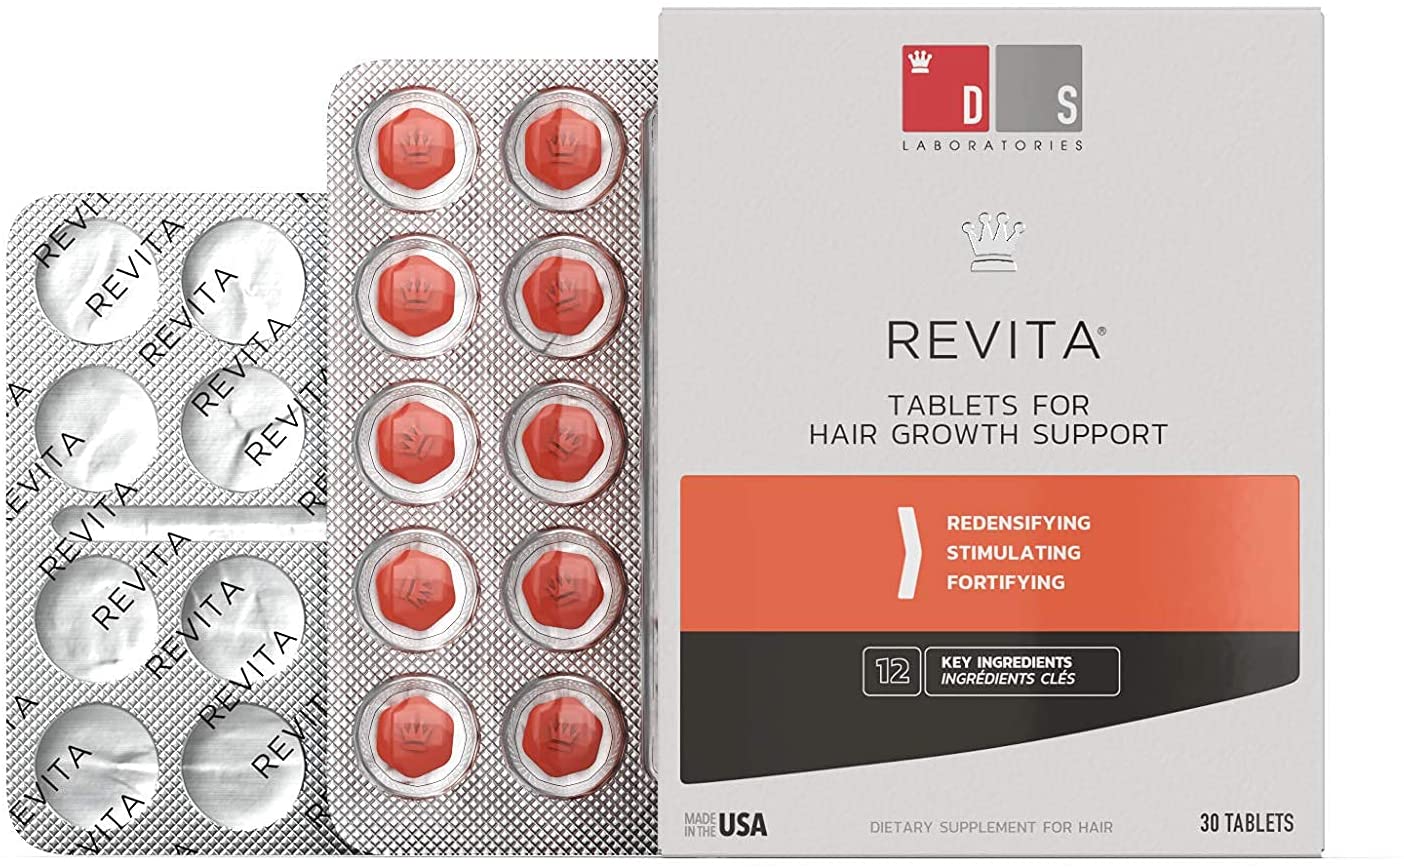 REVITA Tablets For Hair Growth Support